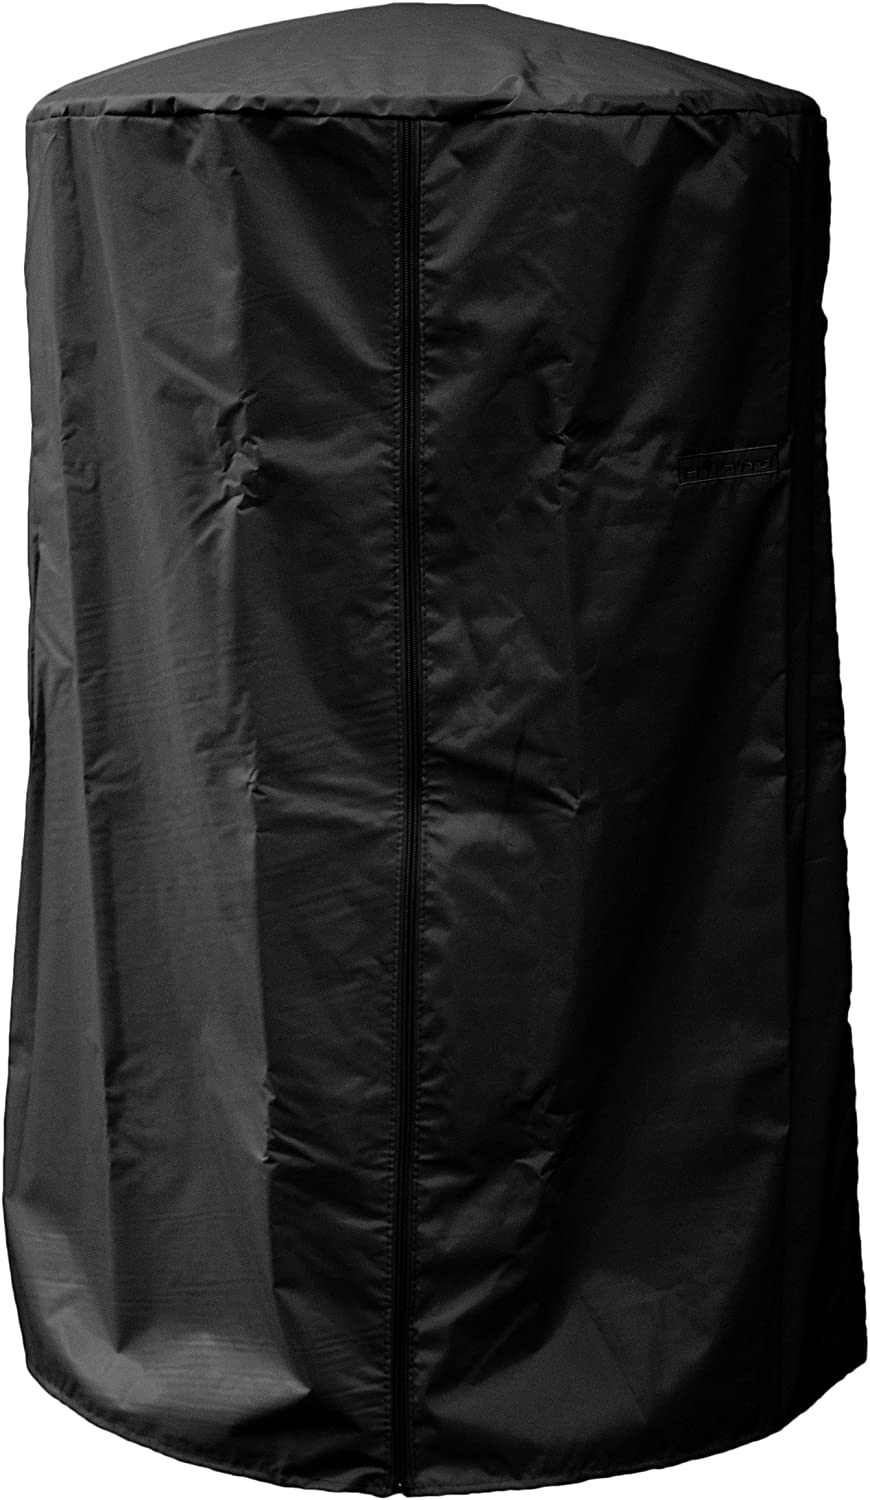 Stand-up Heater Cover Waterproof with Zipper Round Heater Covers for Outdoor Heater Protectors 89 H x 33 D x 19 B Black Garden Patio Heater Cover 